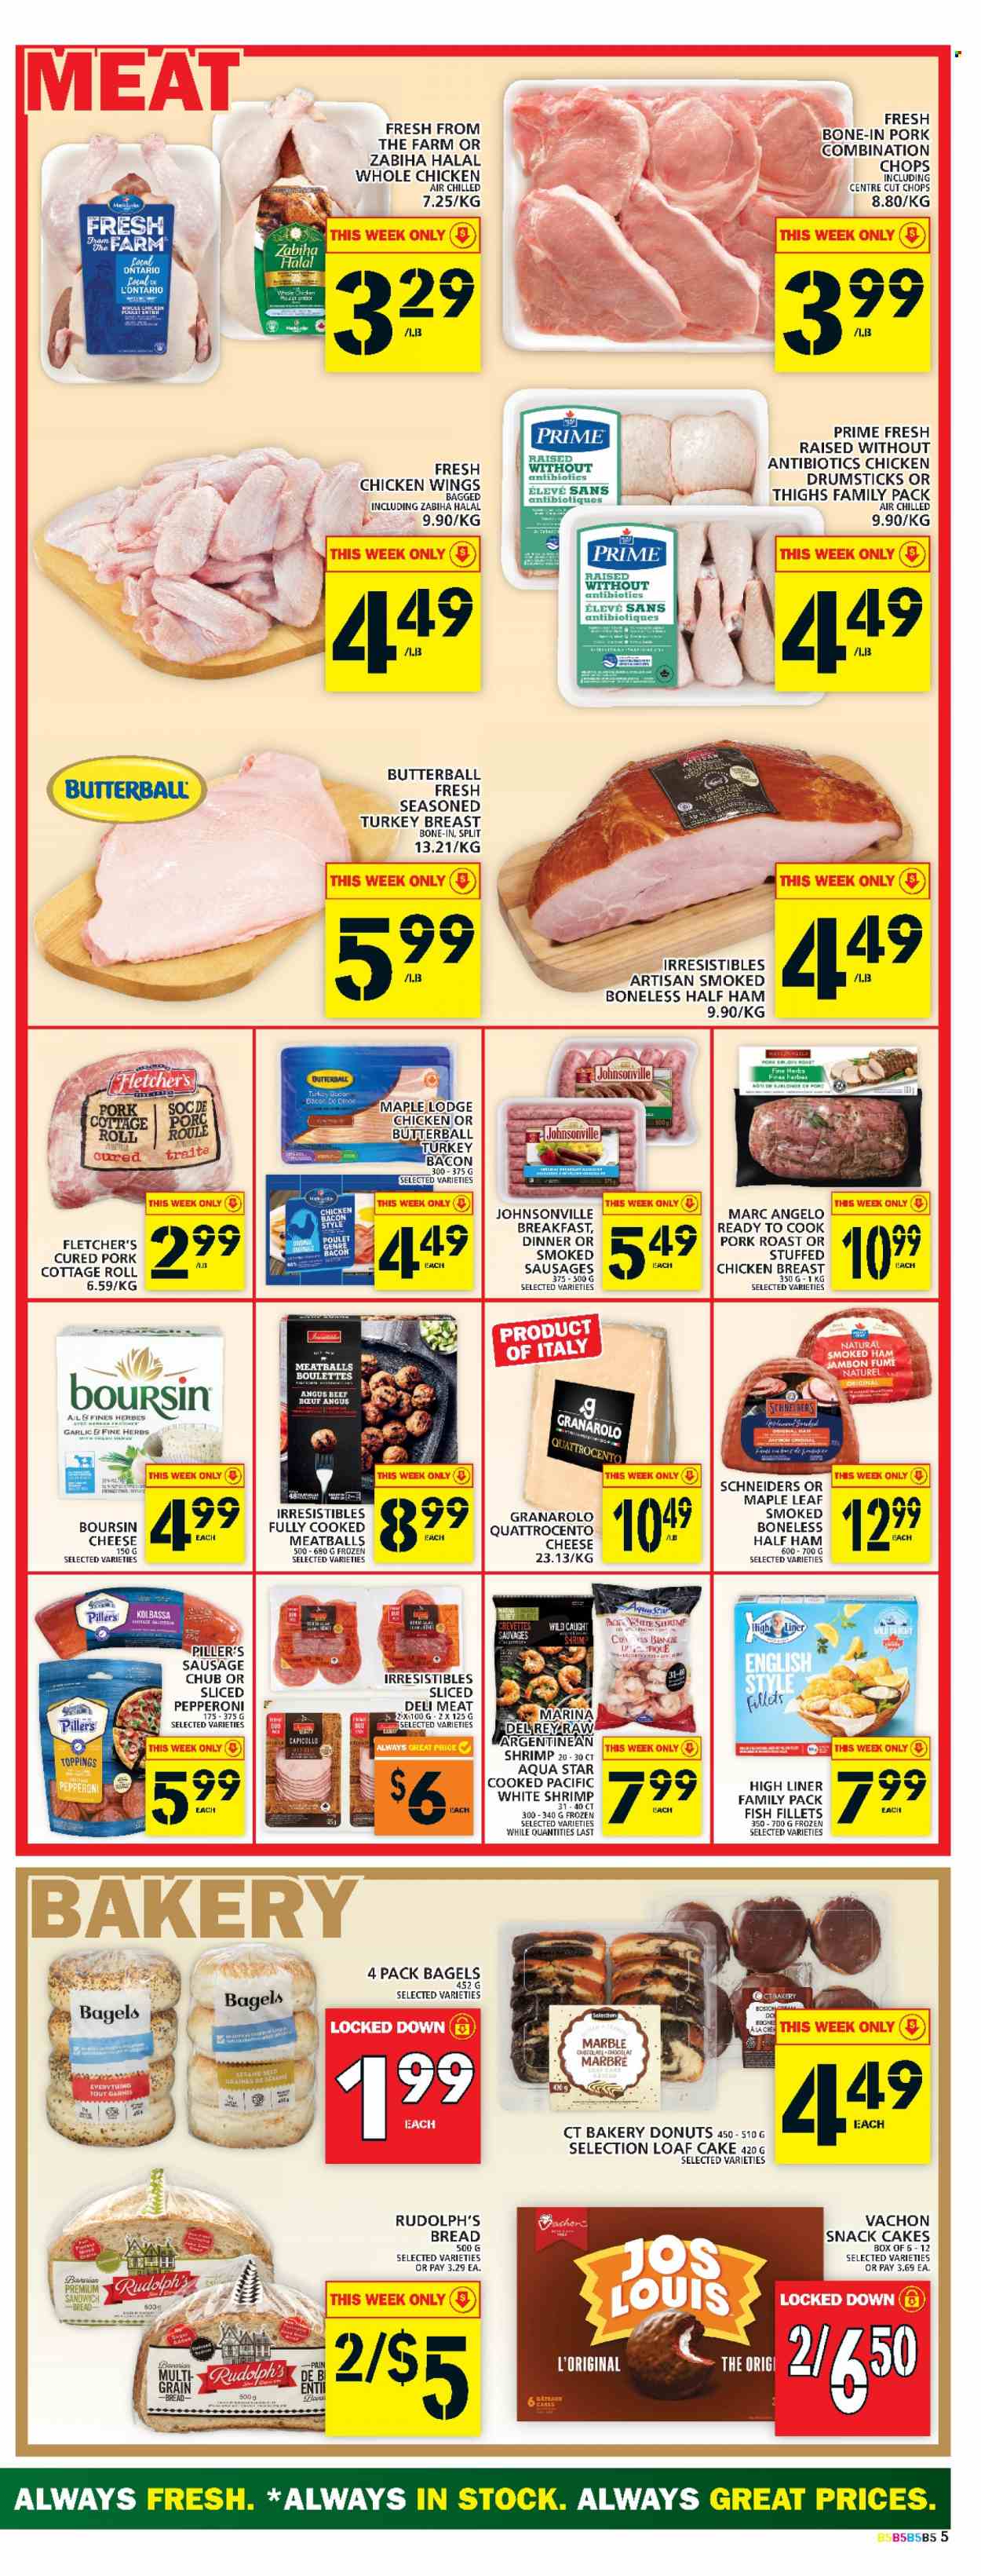 thumbnail - Food Basics Flyer - January 26, 2023 - February 01, 2023 - Sales products - bread, cake, donut, loaf cake, garlic, fish fillets, fish, shrimps, meatballs, stuffed chicken, bacon, Butterball, turkey bacon, half ham, ham, smoked ham, Johnsonville, sausage, pepperoni, cheese, chicken wings, snack, sesame seed, turkey breast, whole chicken, chicken drumsticks, chicken, beef meat, pork meat, pork roast. Page 6.